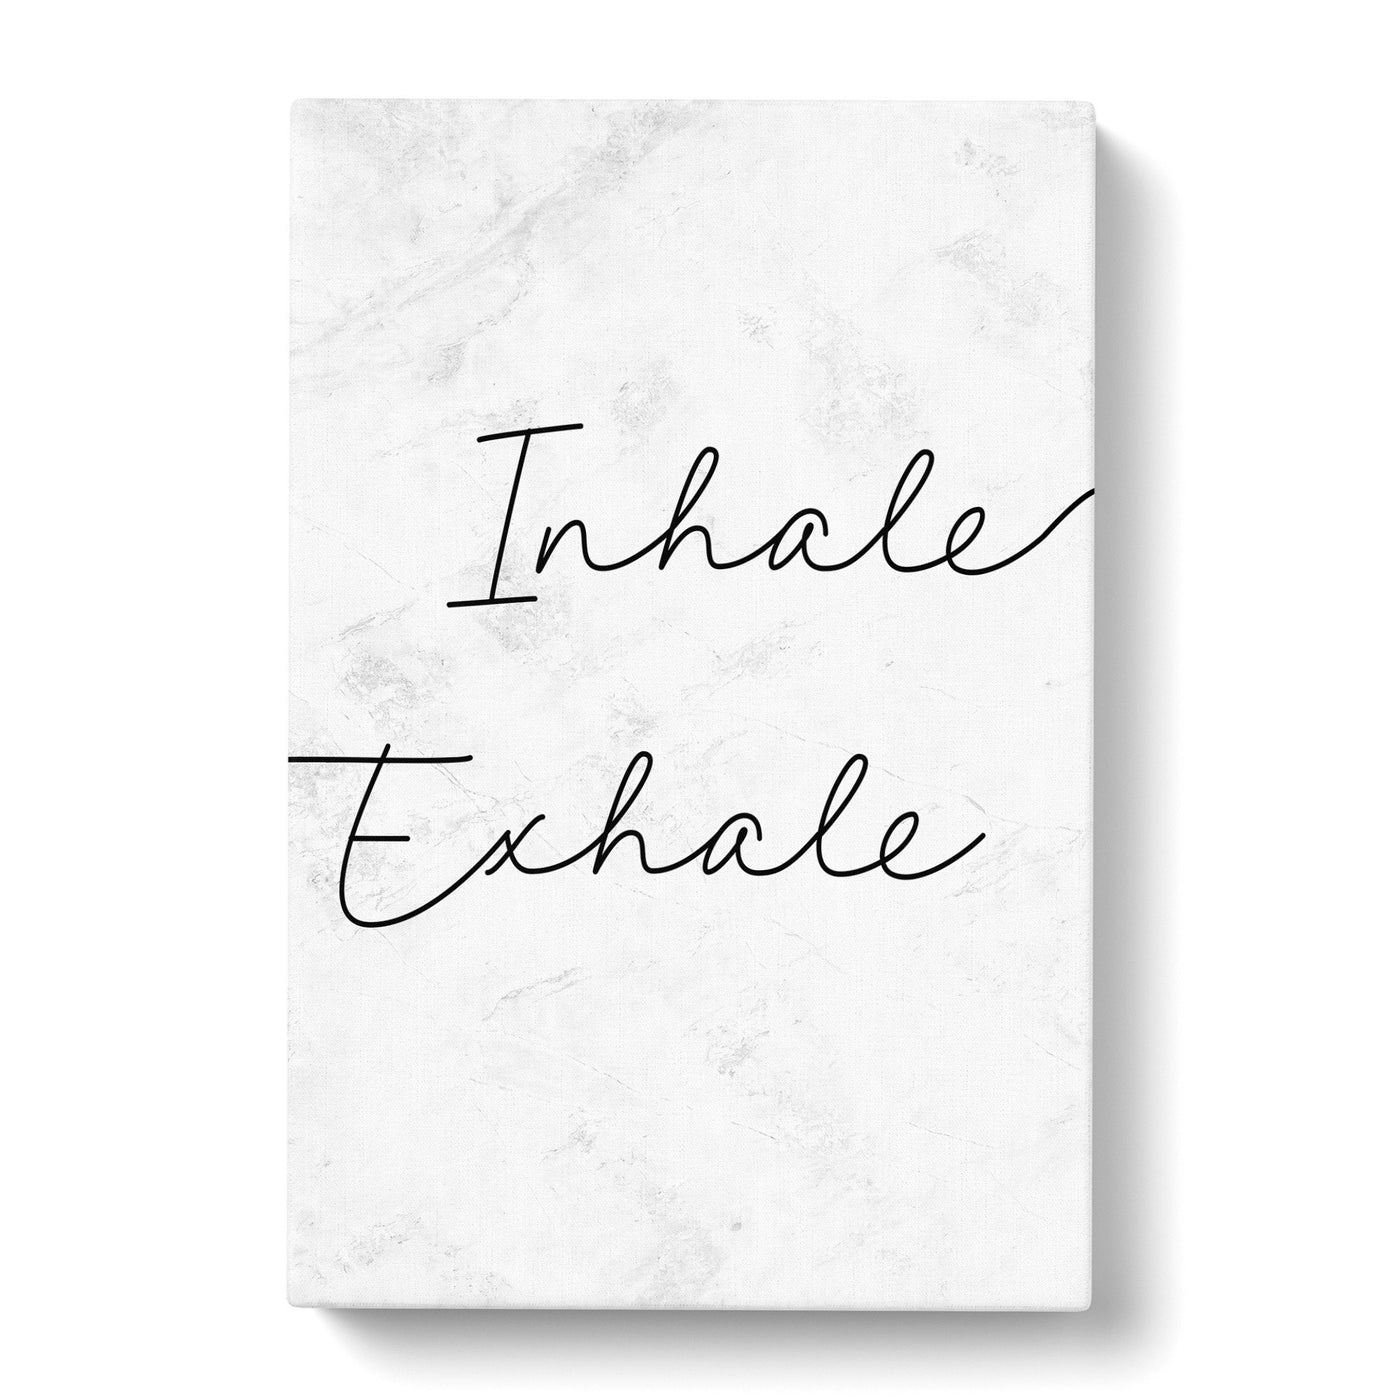 Inhale Exhale V2 Typography Canvas Print Main Image